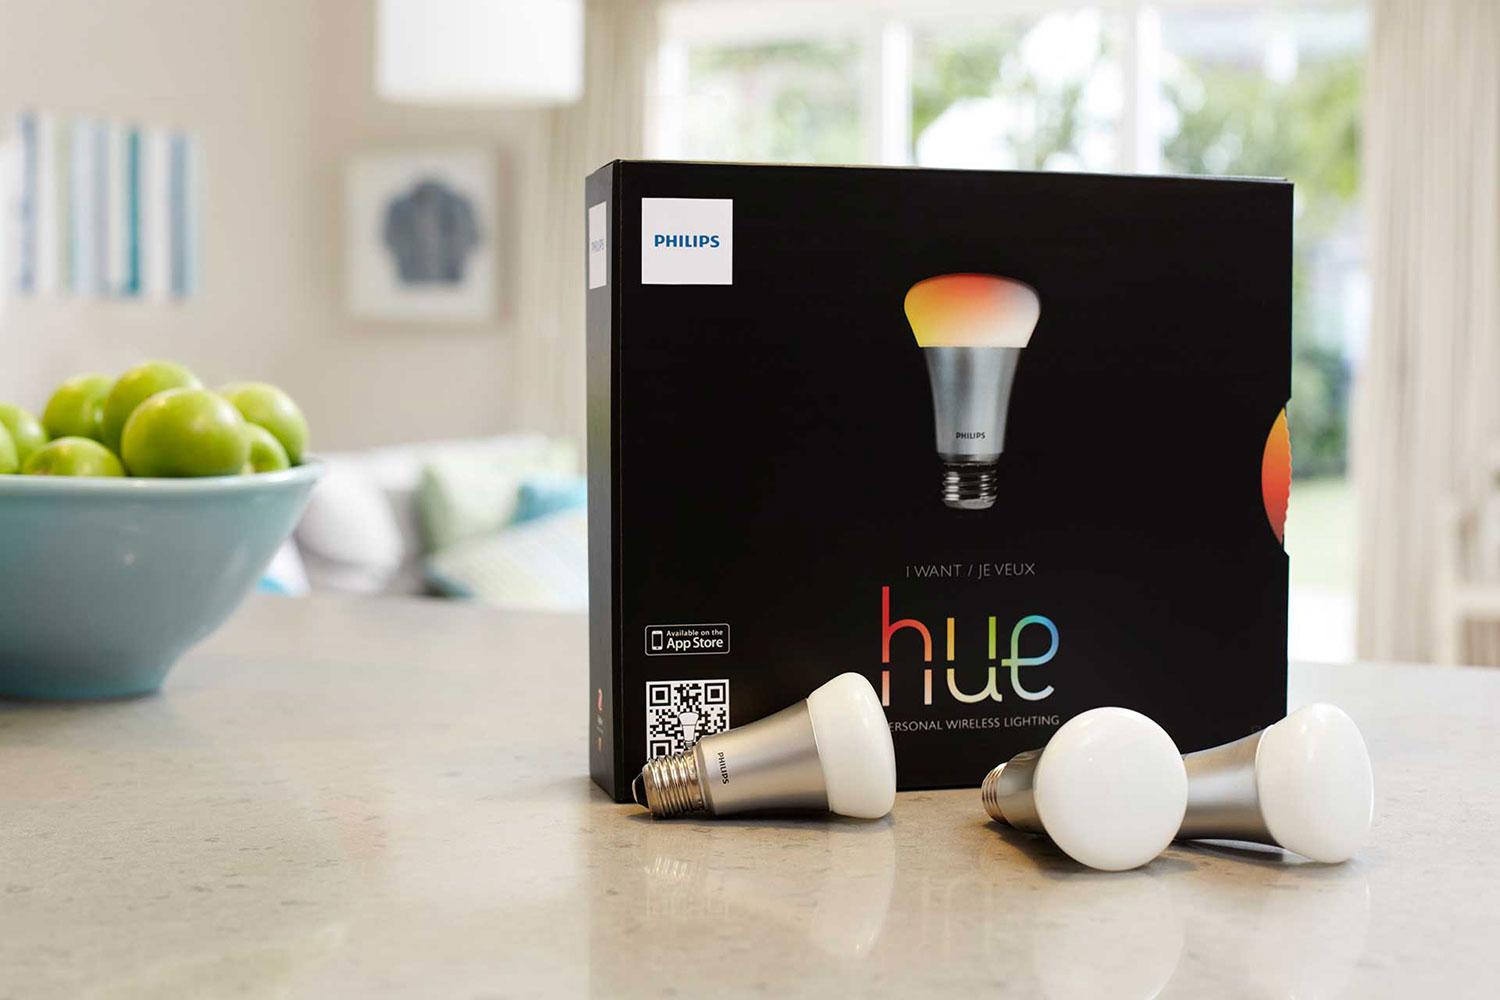 Philips Hue starter pack on kitchen counter.